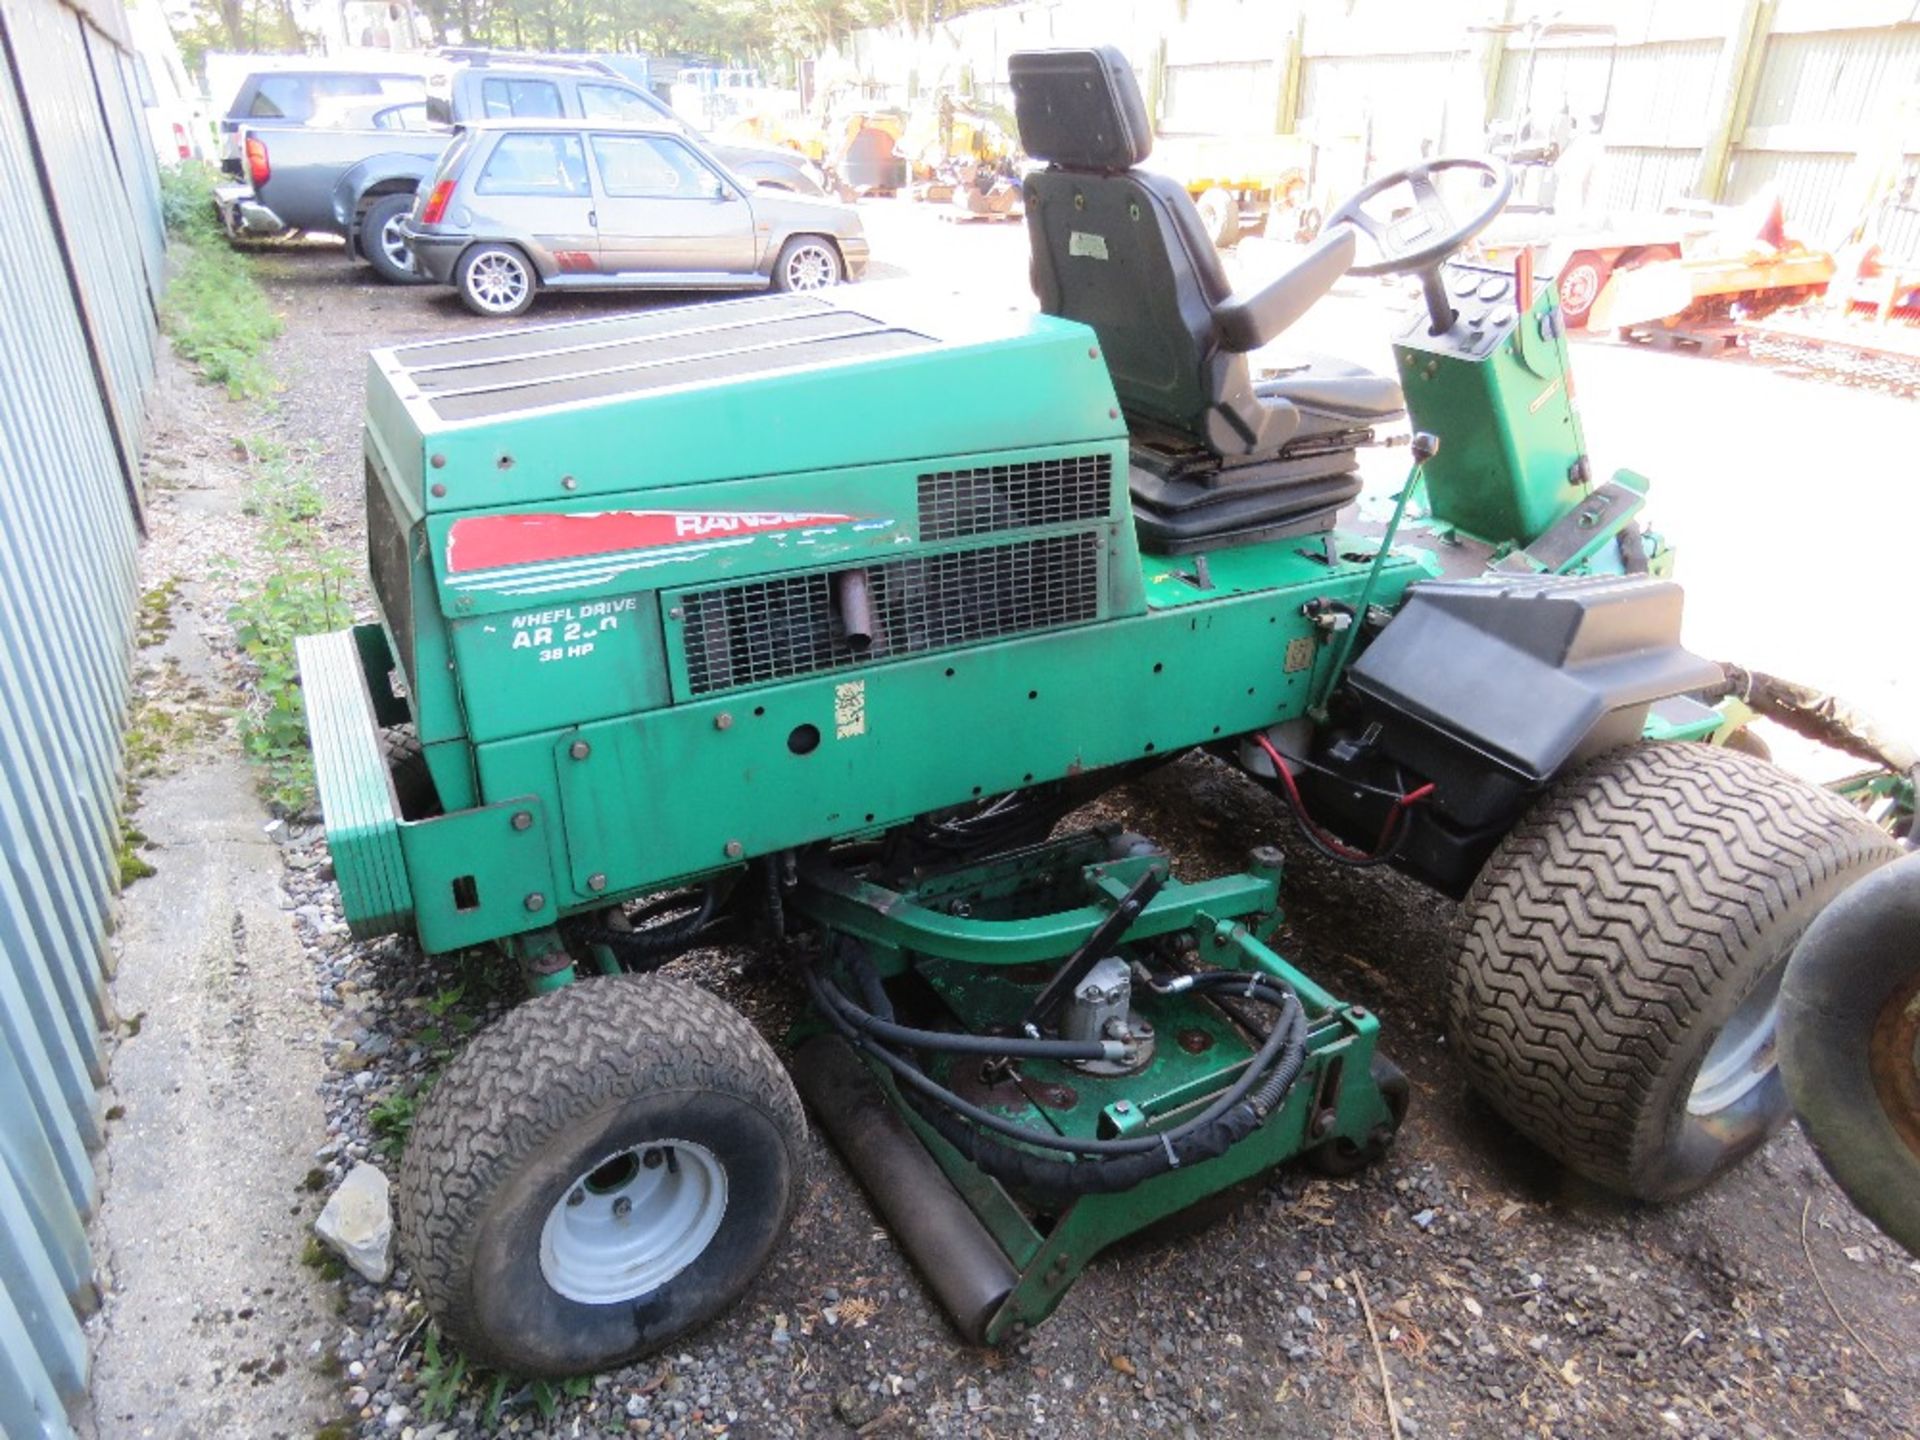 BID INCREMENT NOW £200!! RANSOMES AR250 MOWER WITH 5 ROTARY HEADS - Image 4 of 11